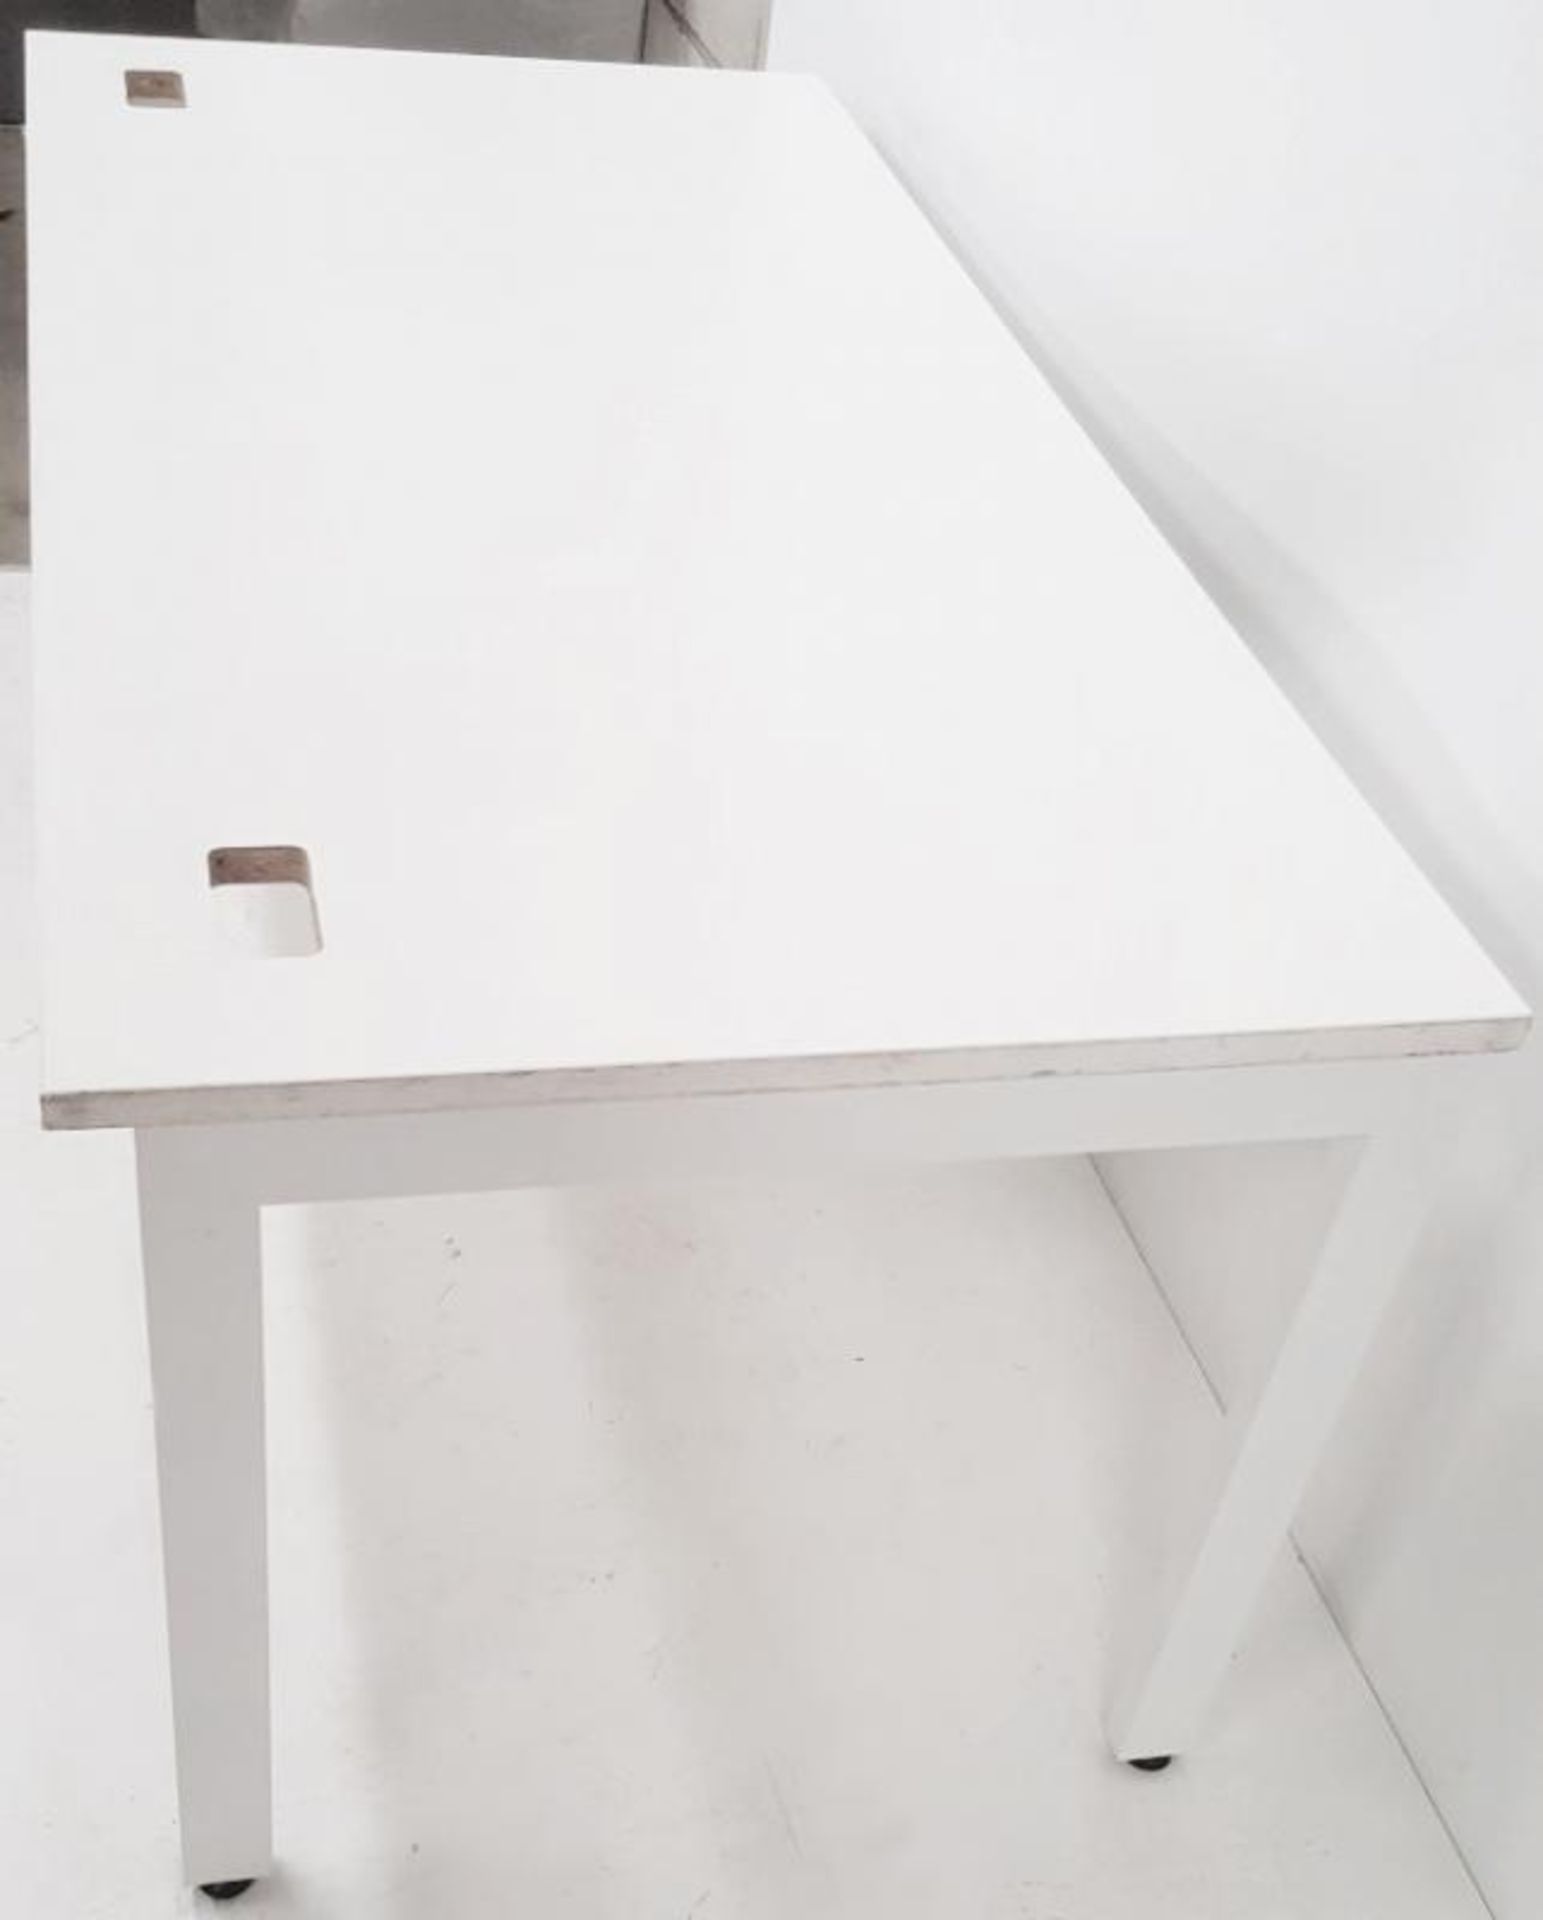 1 x Large Premium Office Desk In White - Used, In Good Condition - Dimensions: W160 x W80 x H74cm - - Image 2 of 5